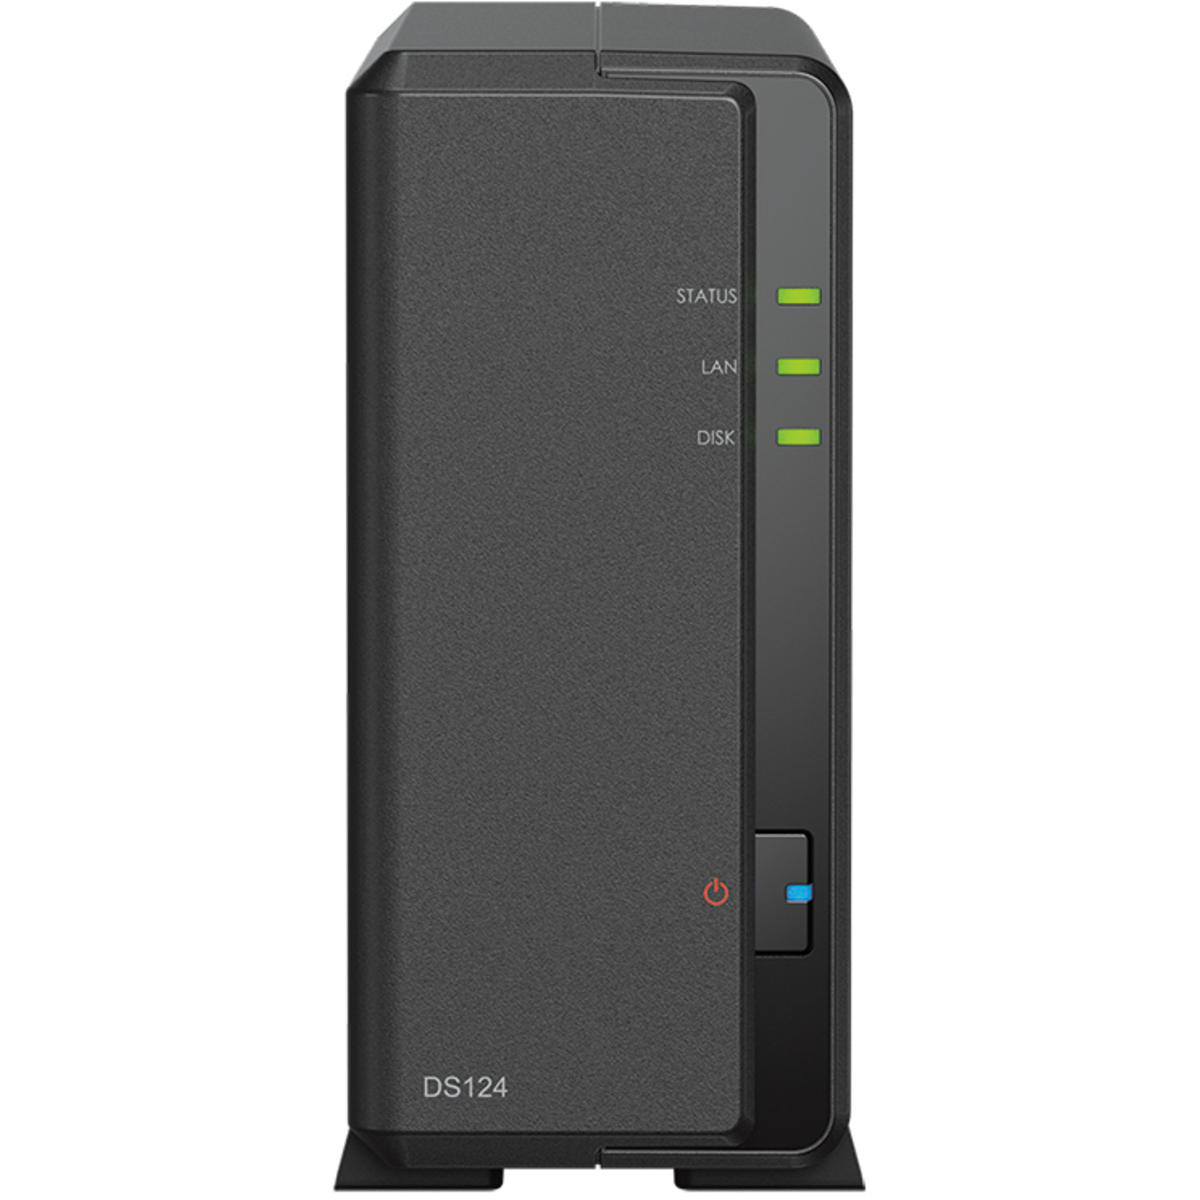 buy Synology DiskStation DS124 24tb Desktop NAS - Network Attached Storage Device 1x24000gb Western Digital Ultrastar HC580 WUH722424ALE6L4 3.5 7200rpm SATA 6Gb/s HDD ENTERPRISE Class Drives Installed - Burn-In Tested - nas headquarters buy network attached storage server device das new raid-5 free shipping simply usa DiskStation DS124